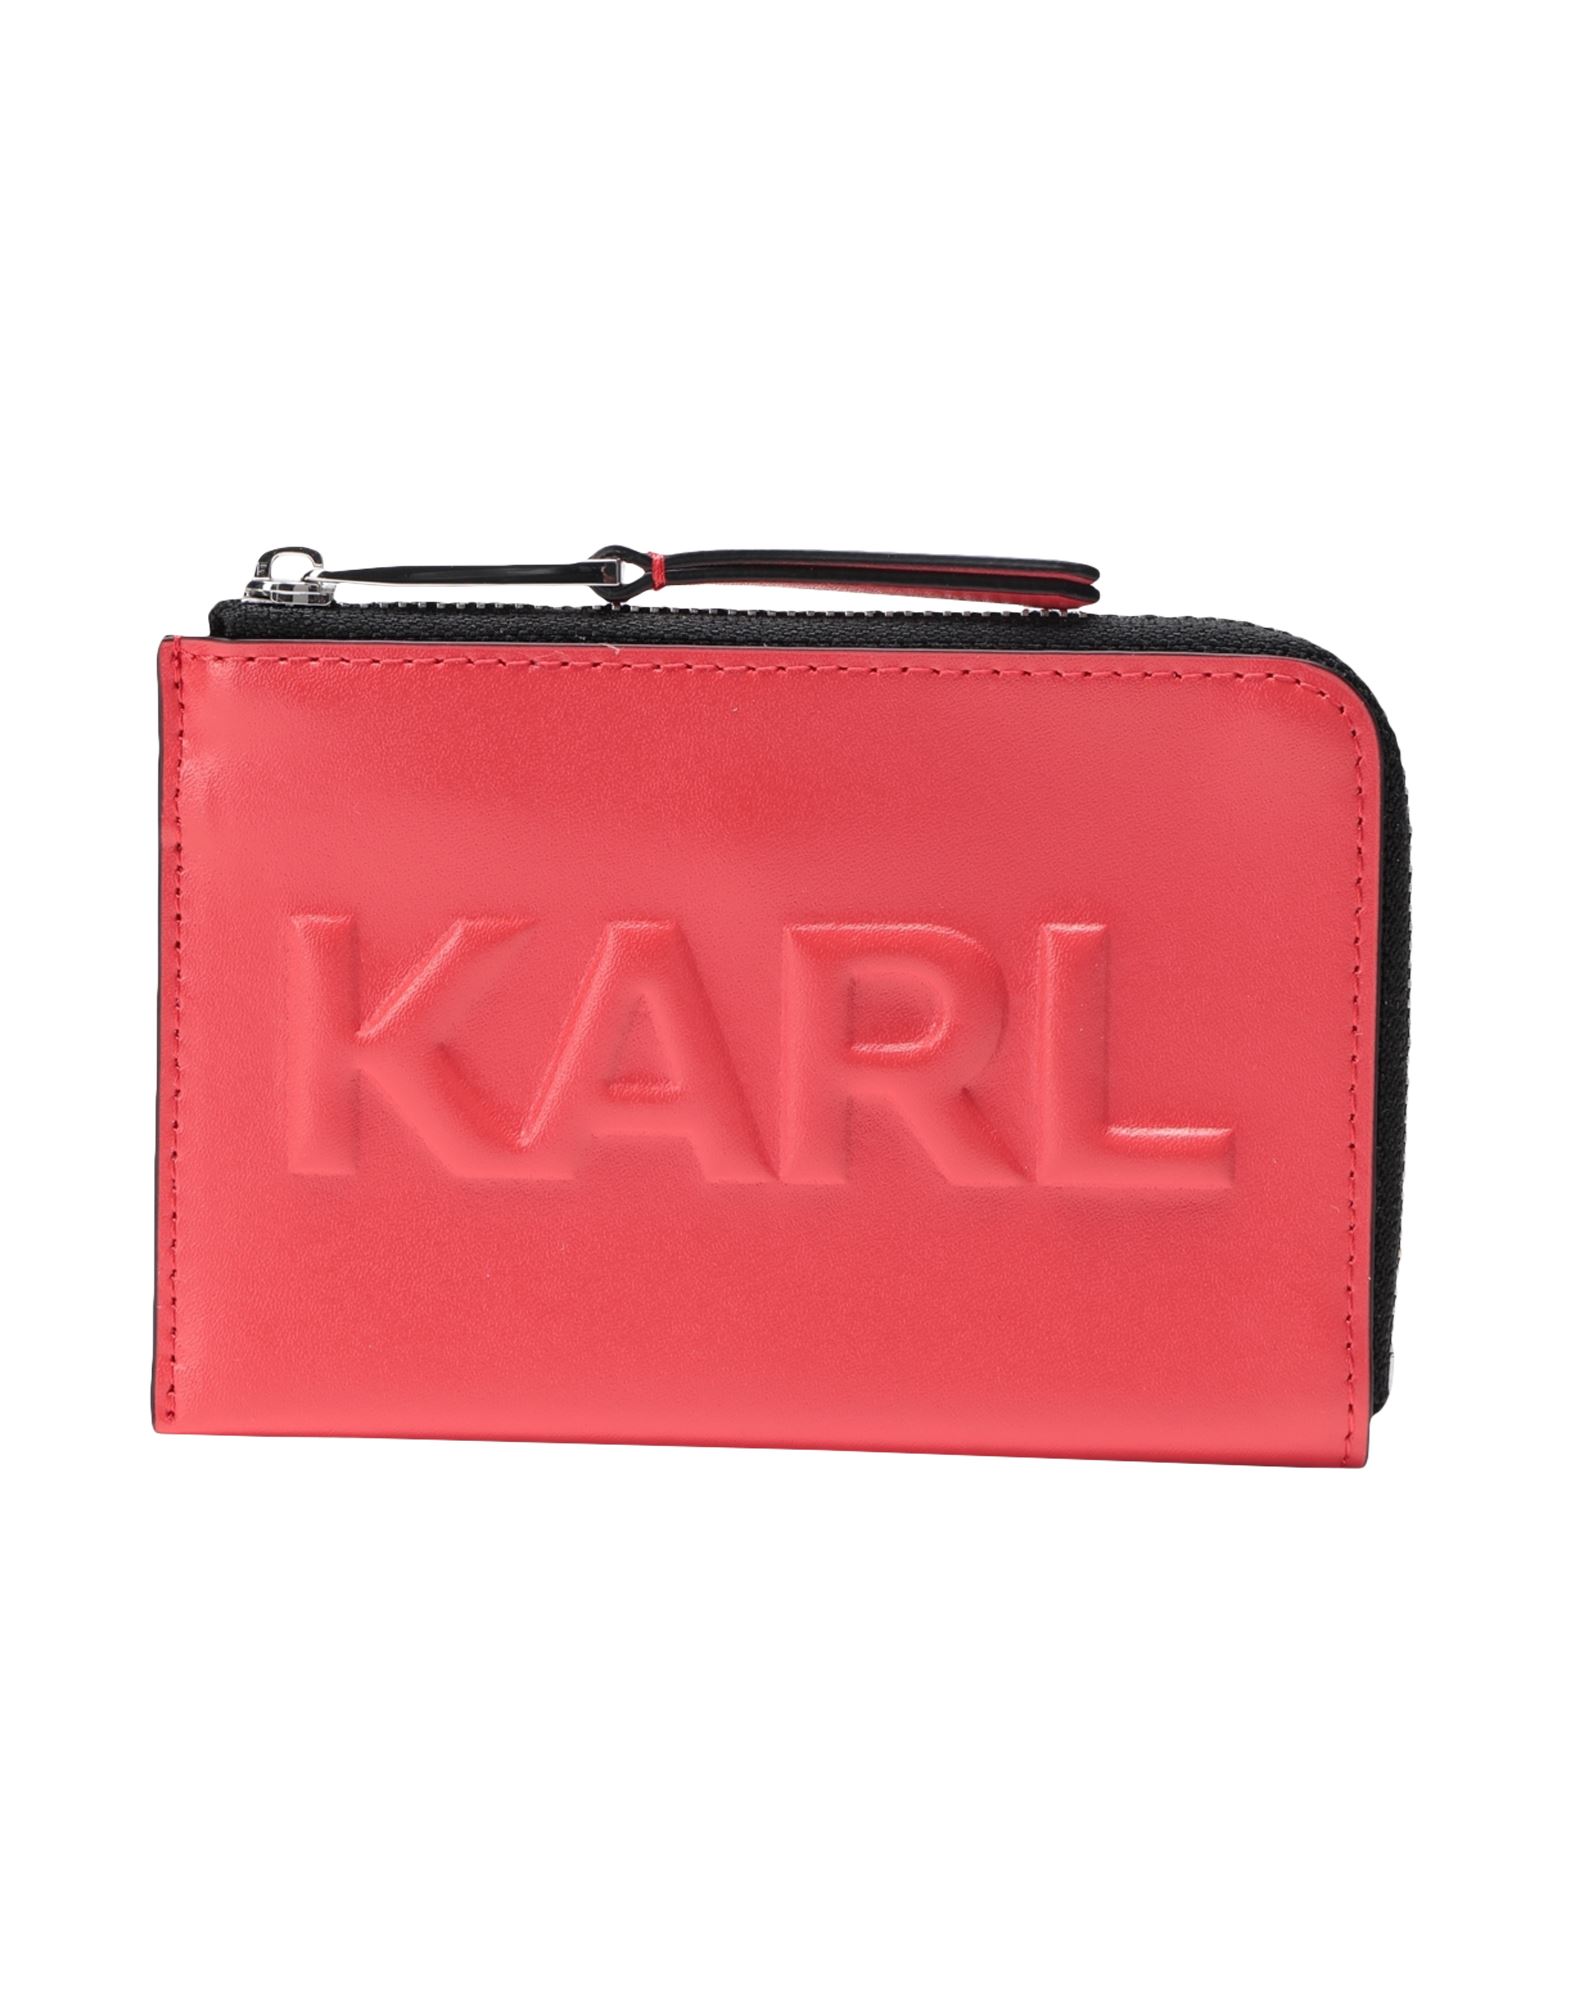 Karl Lagerfeld Document Holders In Red